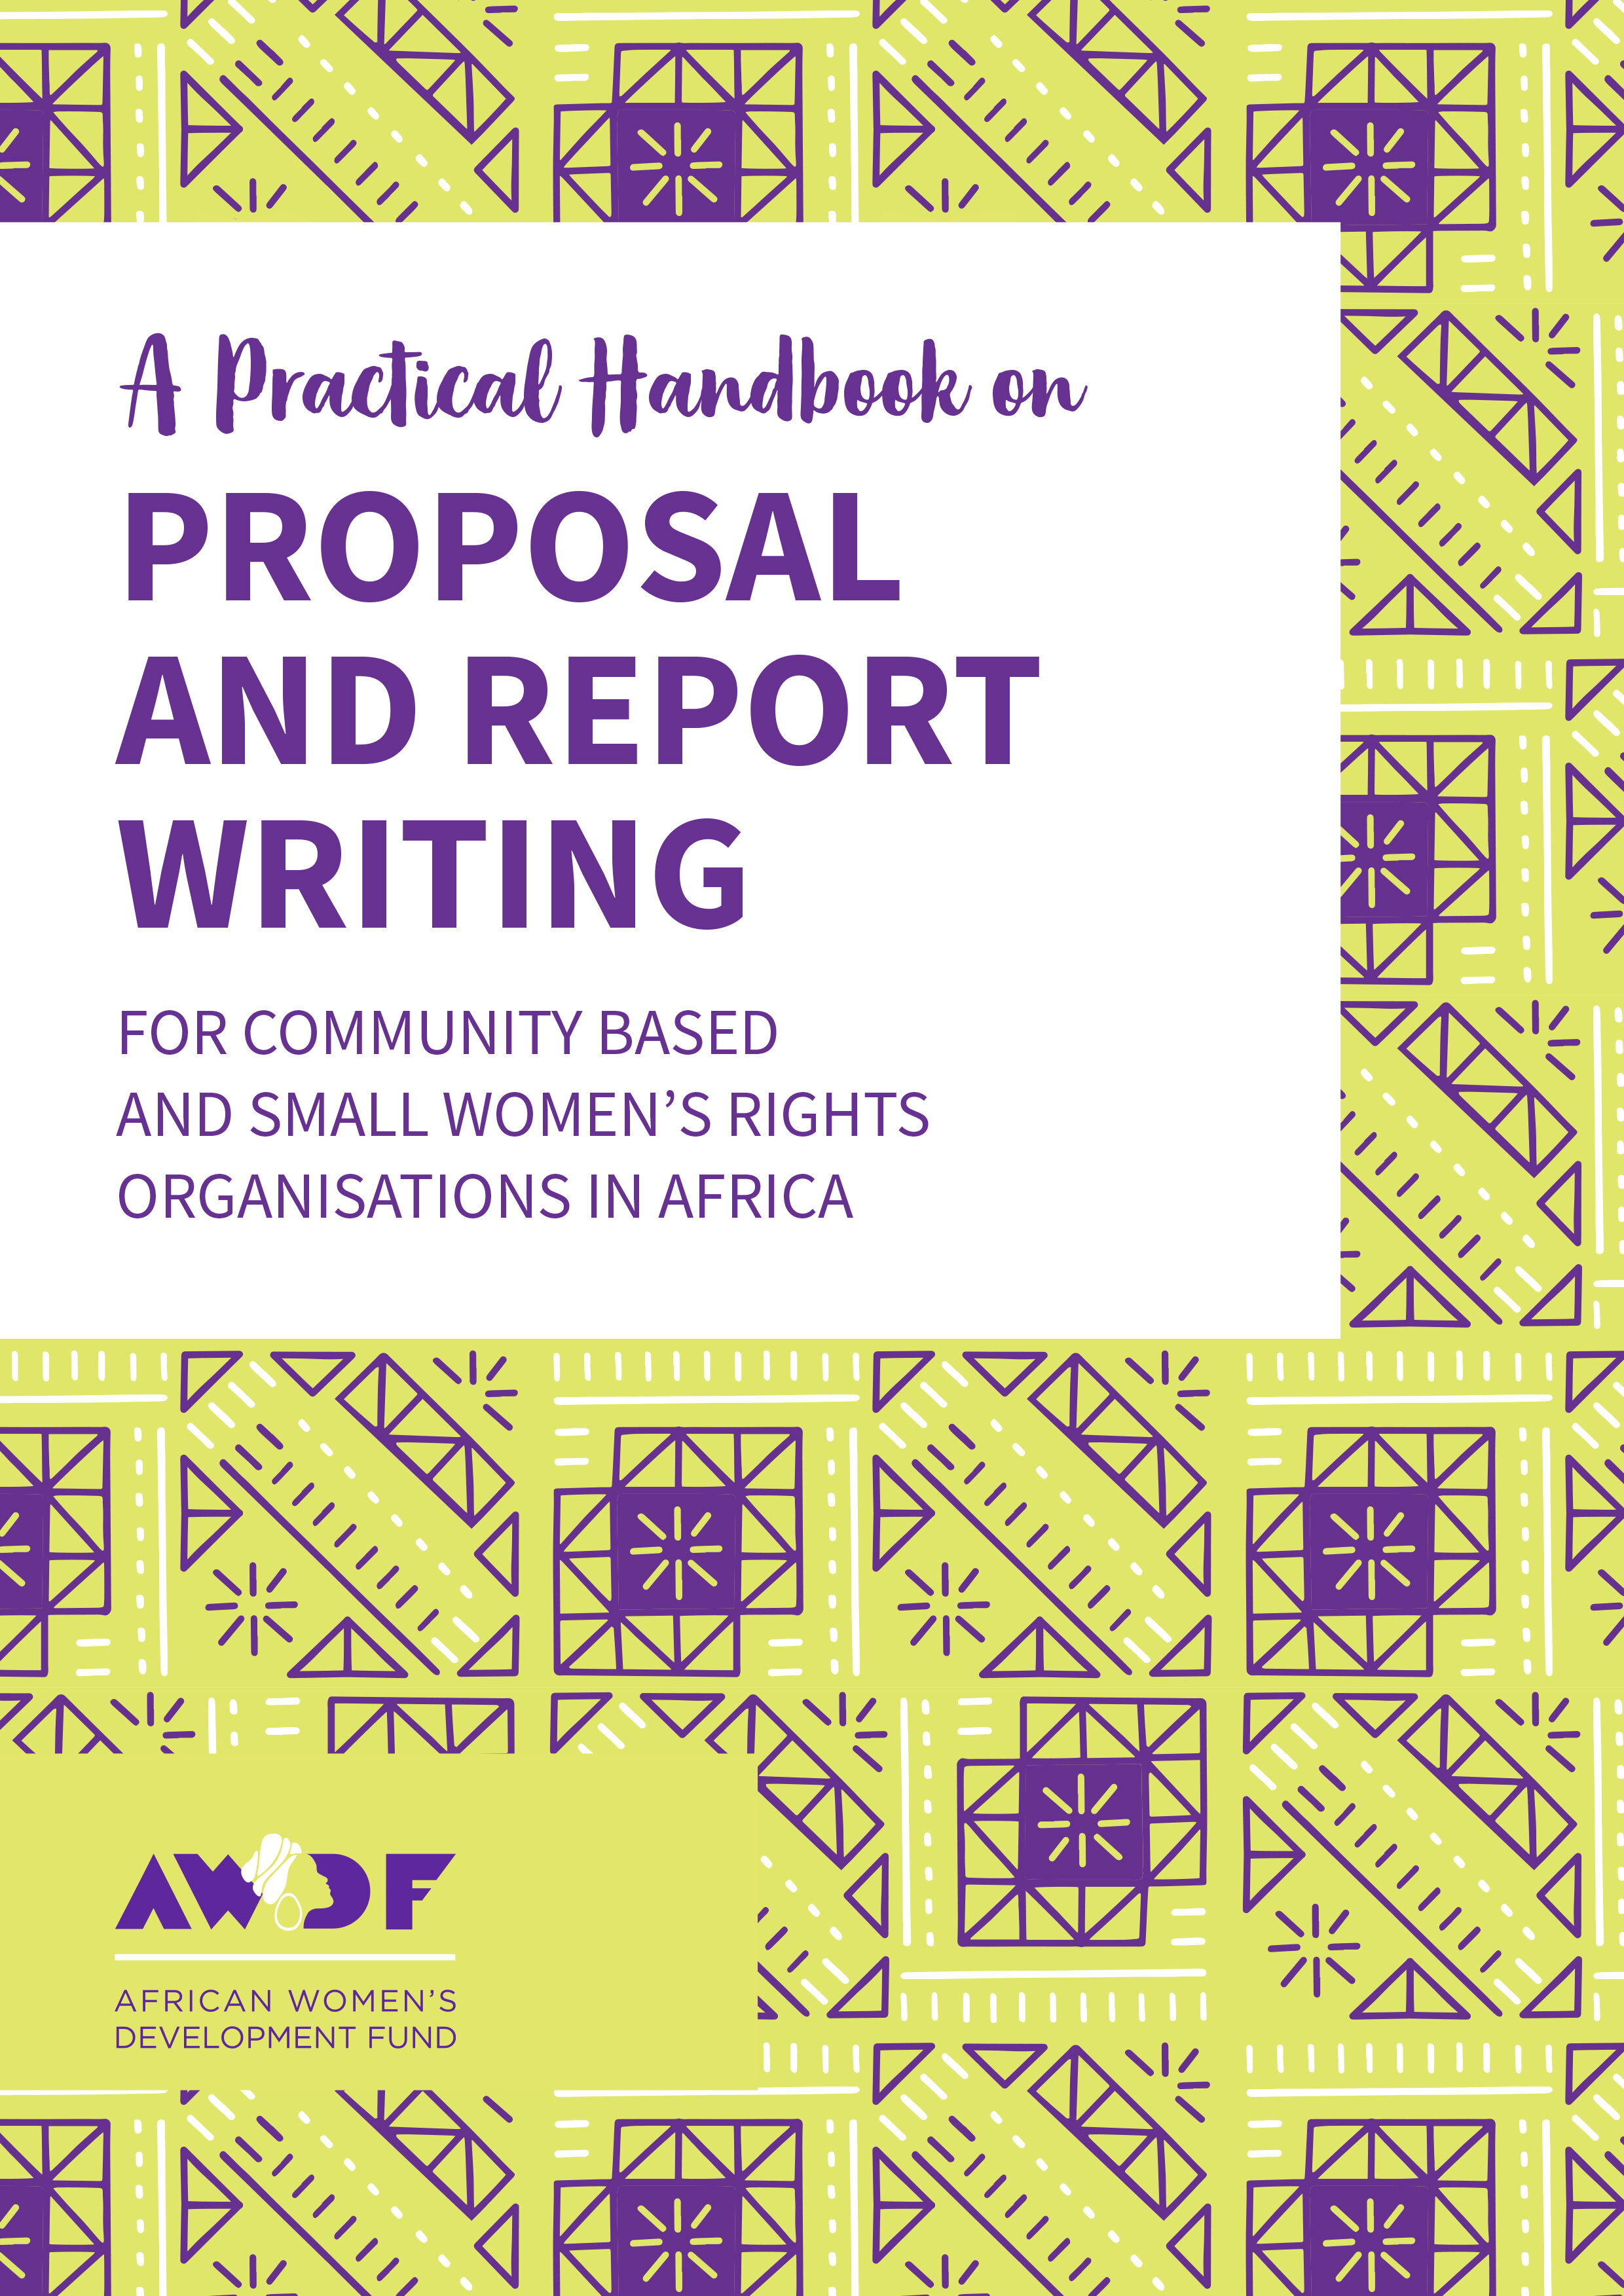 AWDF Capacity Building – A Practical Handbook on Proposal and Report Writing-1.jpg